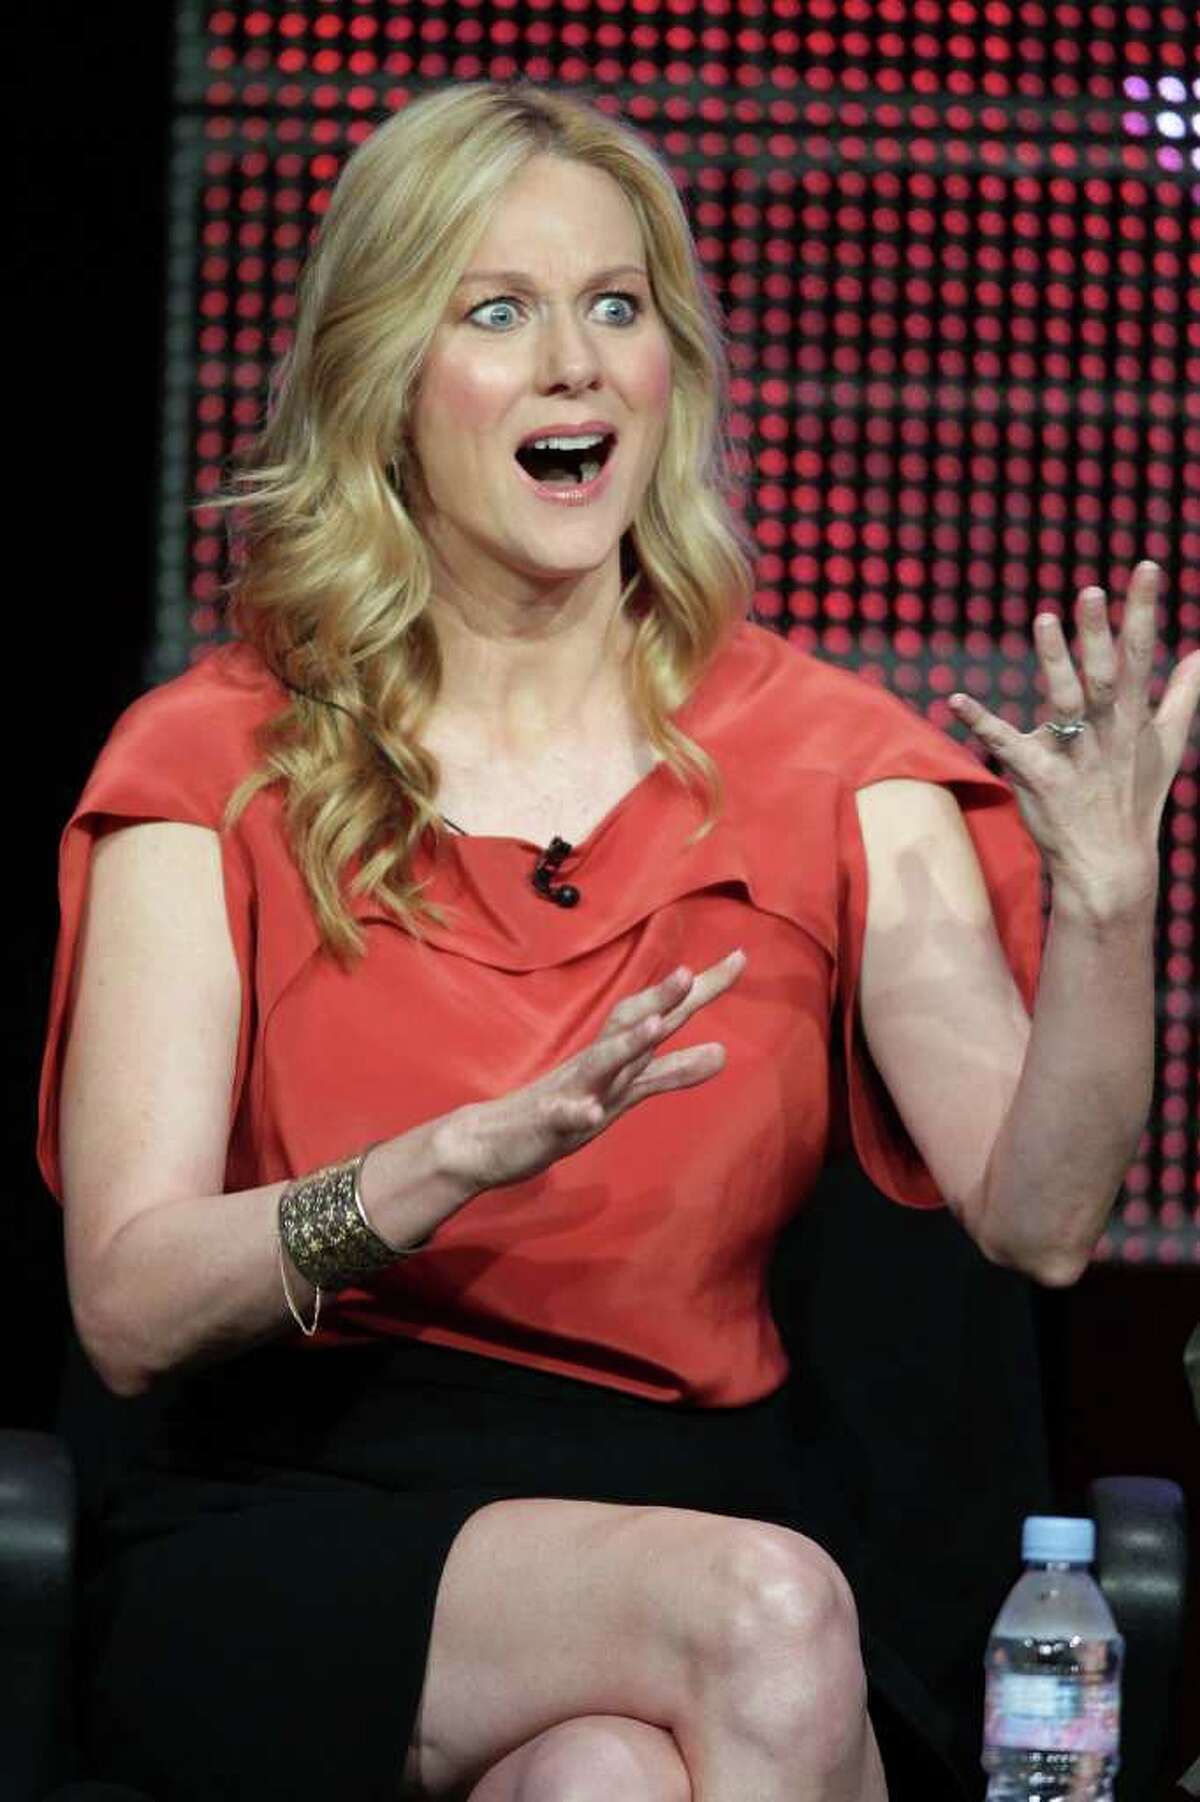 BEVERLY HILLS, CA - JULY 29: Actress and Executive Producer Laura Linney speaks onstage during "The Big C" panel during the 2010 Summer TCA Tour Day 2 at the Beverly Hilton Hotel on July 29, 2010 in Beverly Hills, California. (Photo by Frederick M. Brown/Getty Images)